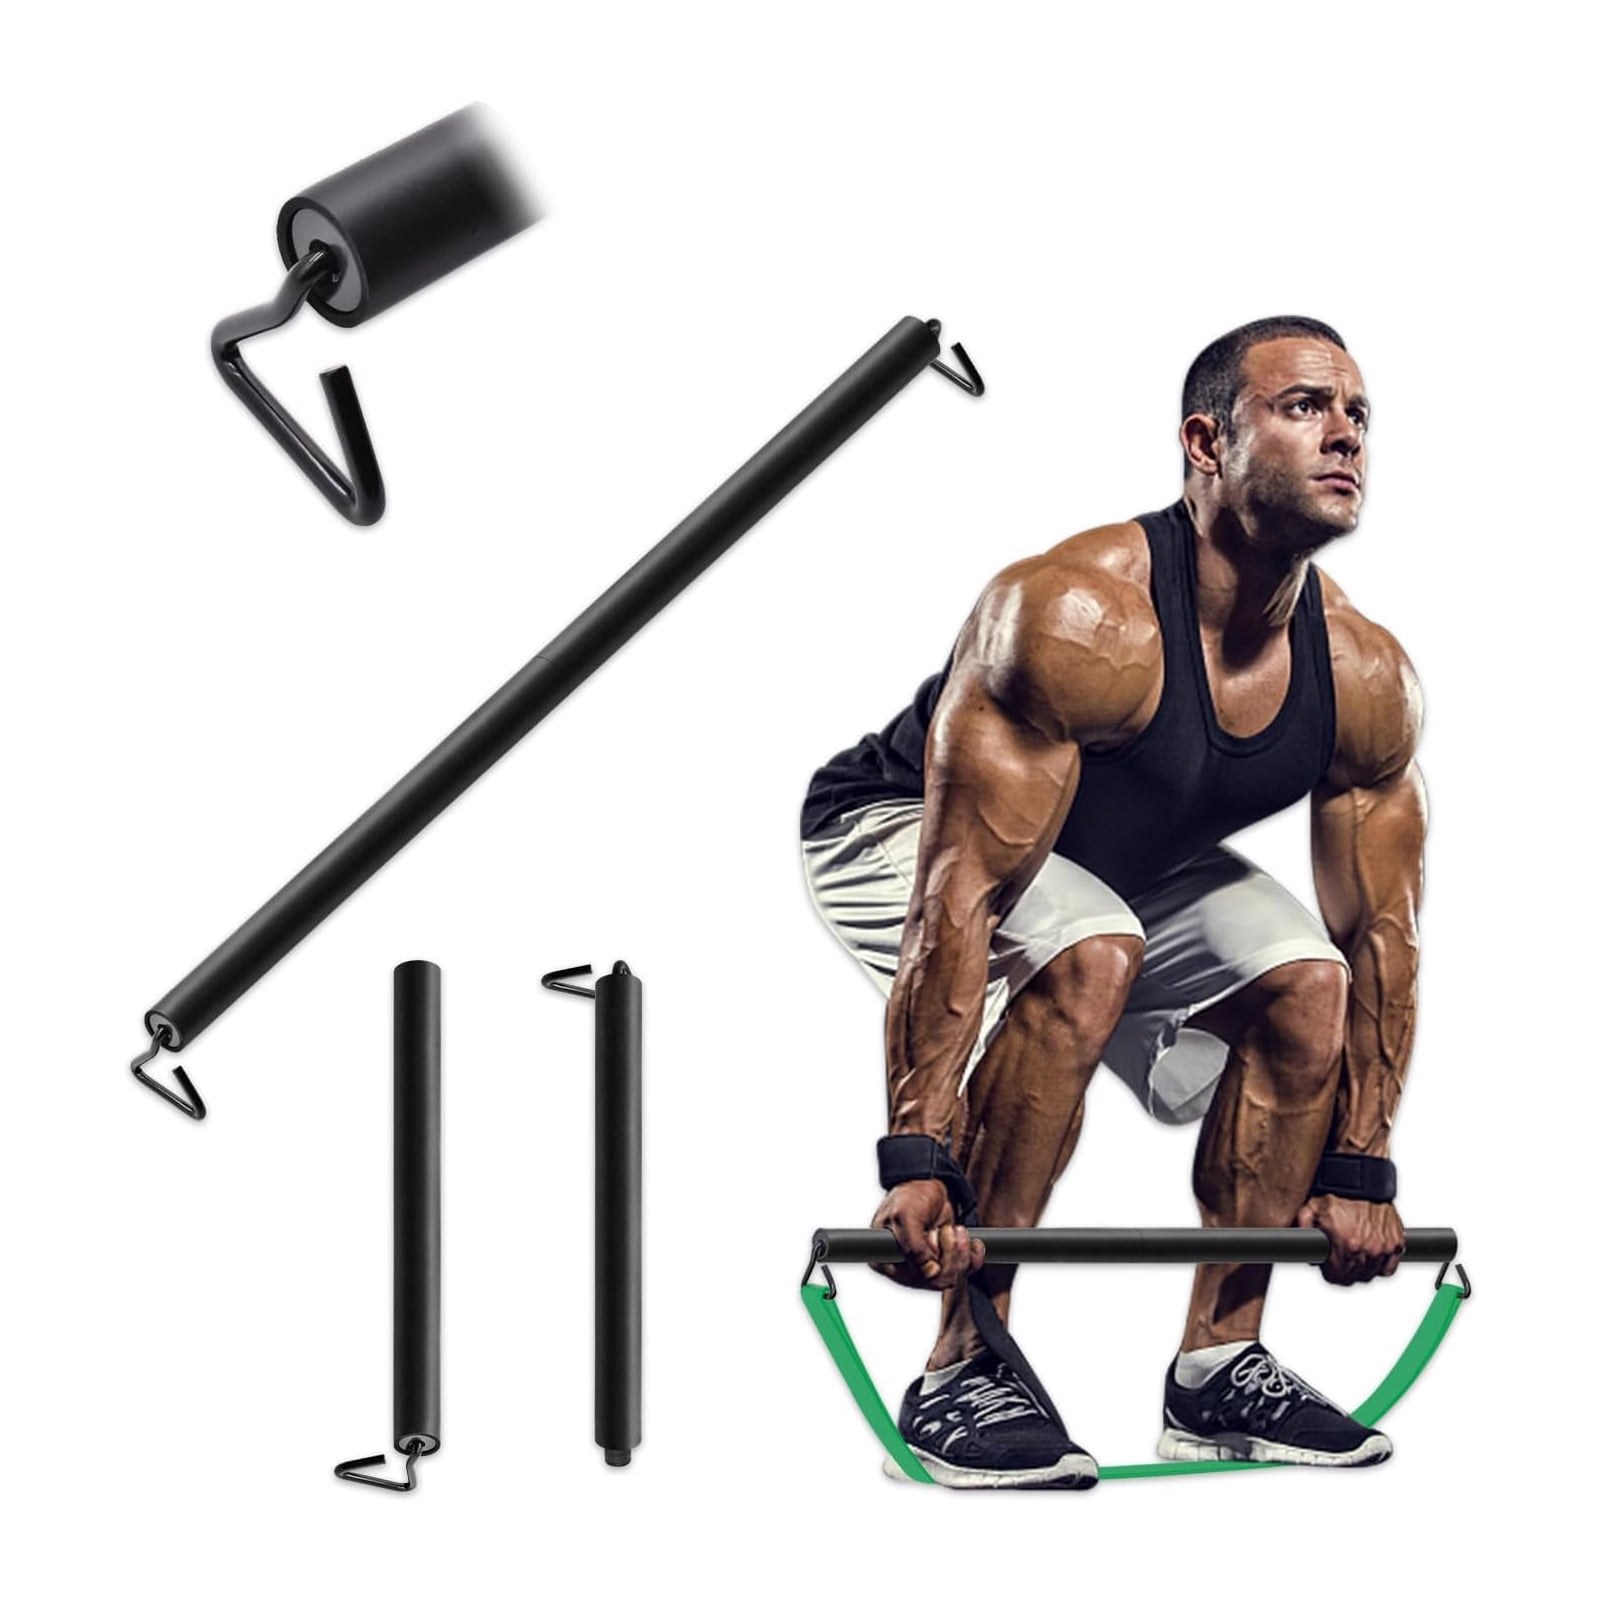 Home Gym With Resistance Bands & Workout Bar